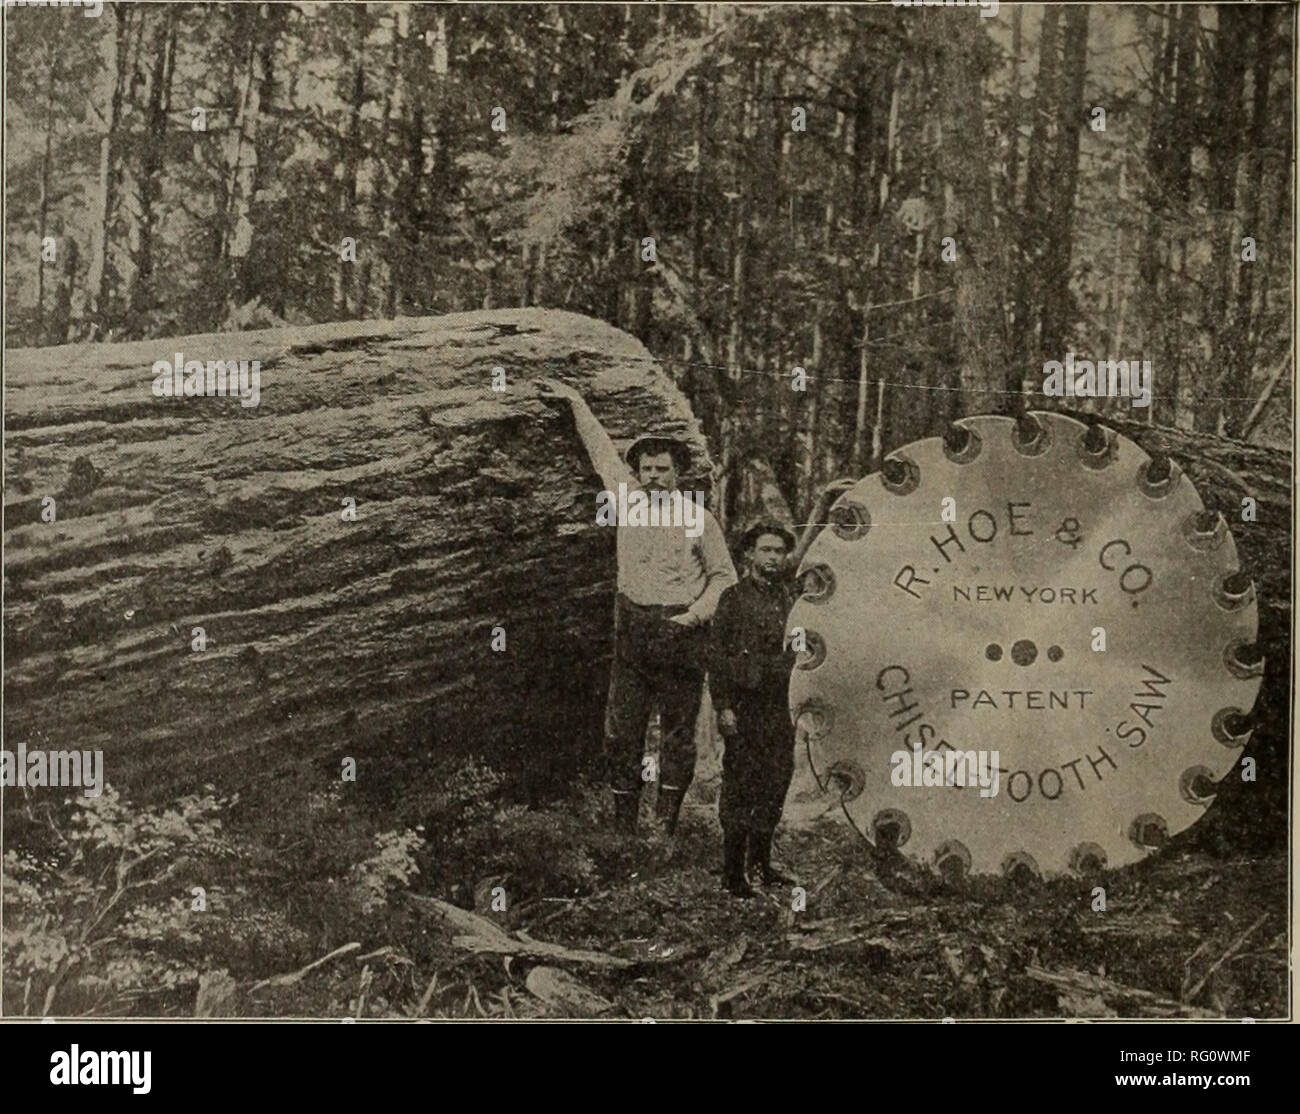 . Canadian forest industries 1907. Lumbering; Forests and forestry; Forest products; Wood-pulp industry; Wood-using industries. H0F1US STEELS EQUIPMENT GO. Main f8l2-'3-'4-'5-'6 Lowman Bldff. °ffice (SEATTLE, Wash. Branches-I PORTLAND. ORE. 515 Chamber of Commerce. Rails, Coaches, Locomotives, Freight Cars, Logging Cars, Dump Cars, Hand Cars, Velocipede Cars, Second Hand Lo- comotives, Plates, Frogs, Switches, Spikes, Headlights, Lanterns, Railway Ties, Railway Supplies, Second Hand Rail- way Equipment, Bolts, Pig Iron, Tin Plate, Wire Rope, Machinery, Steam Shovels, Steam Pumps, Merchant Stee Stock Photo